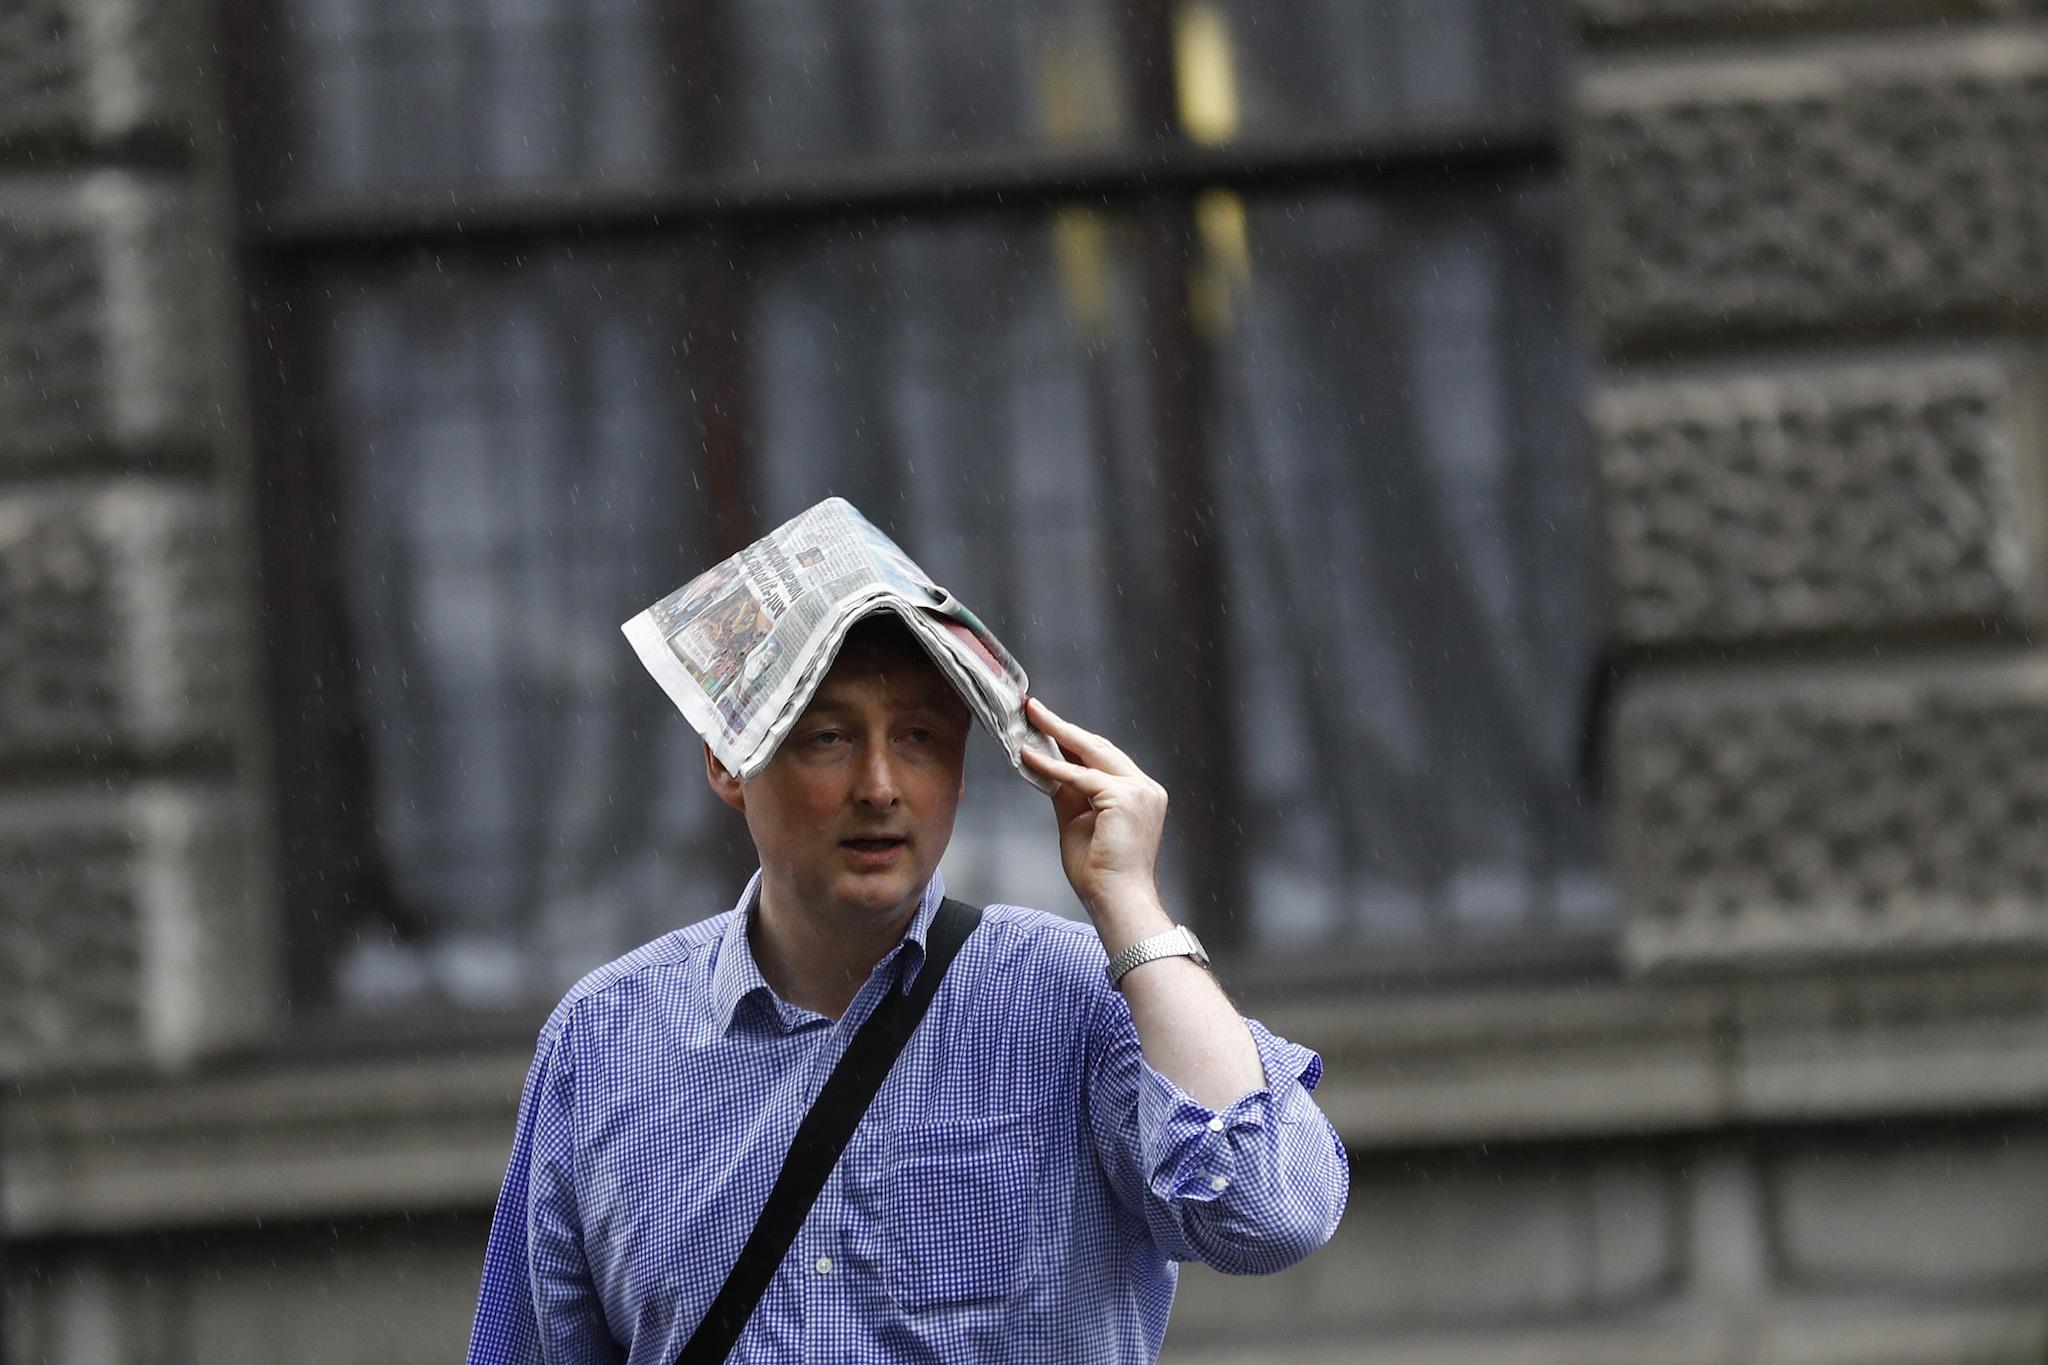 A man covers his head with a newspaper during heavy rain in London, Britain June 20, 2016